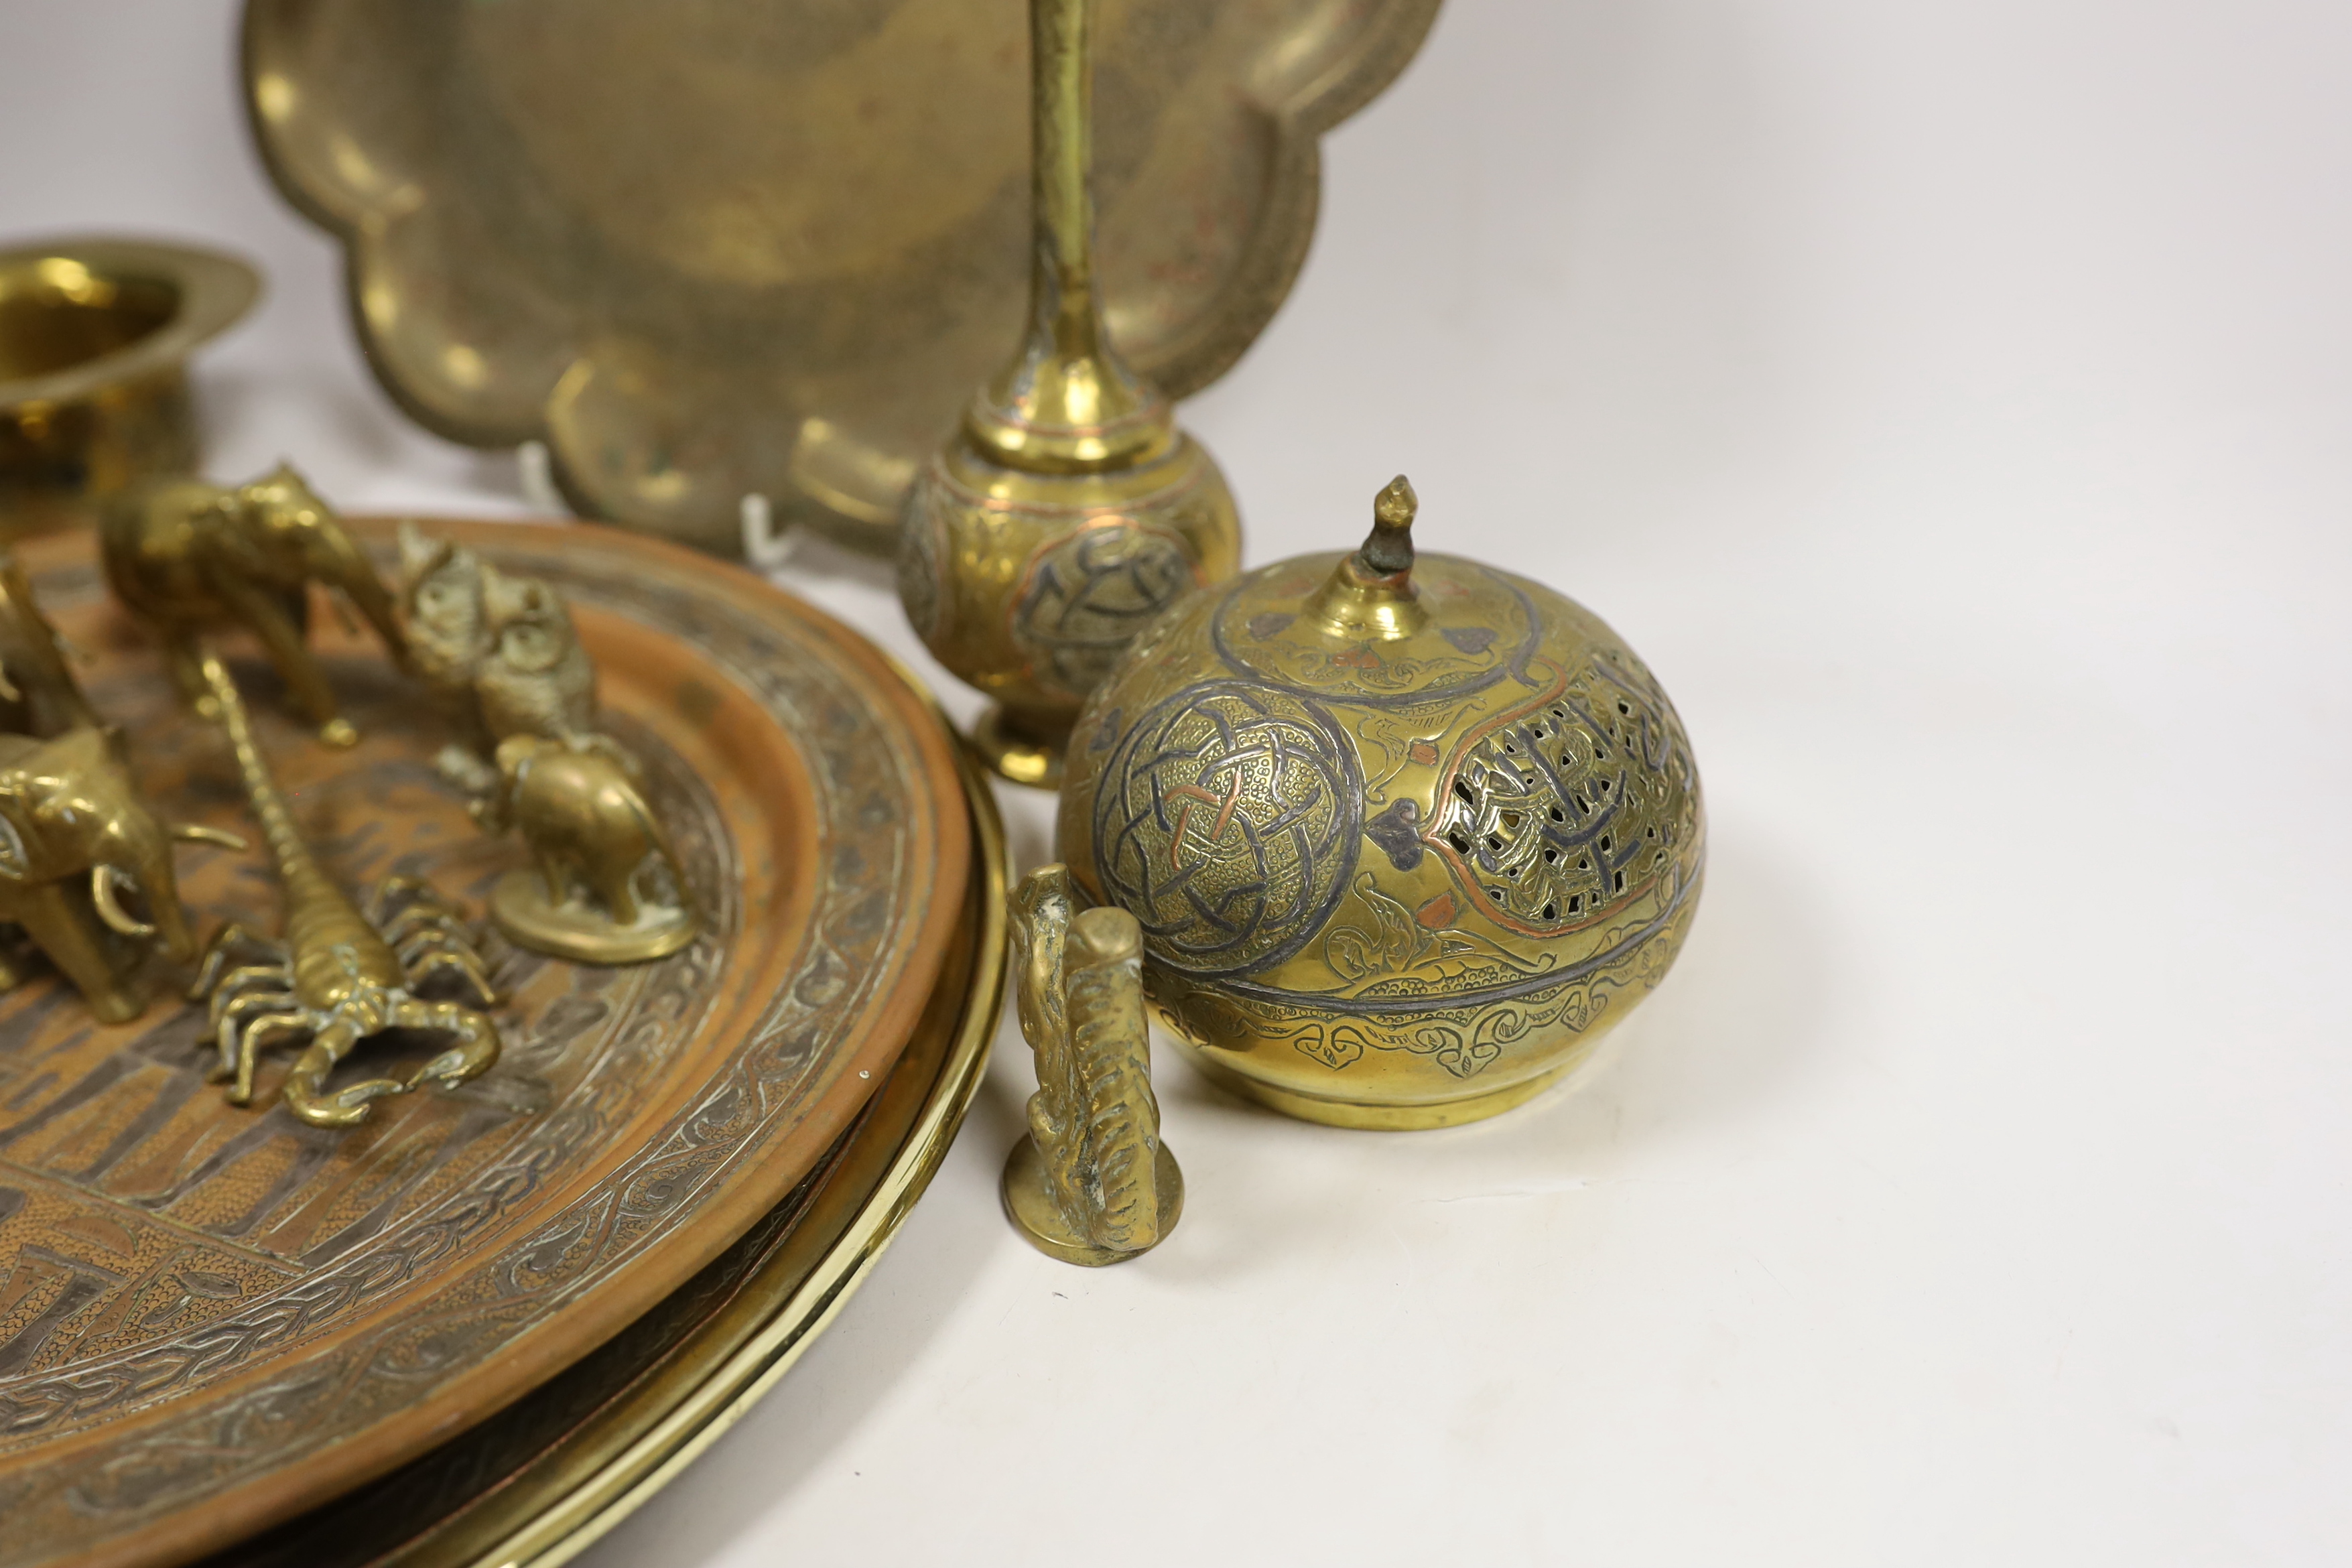 A group of Persian metal and brassware